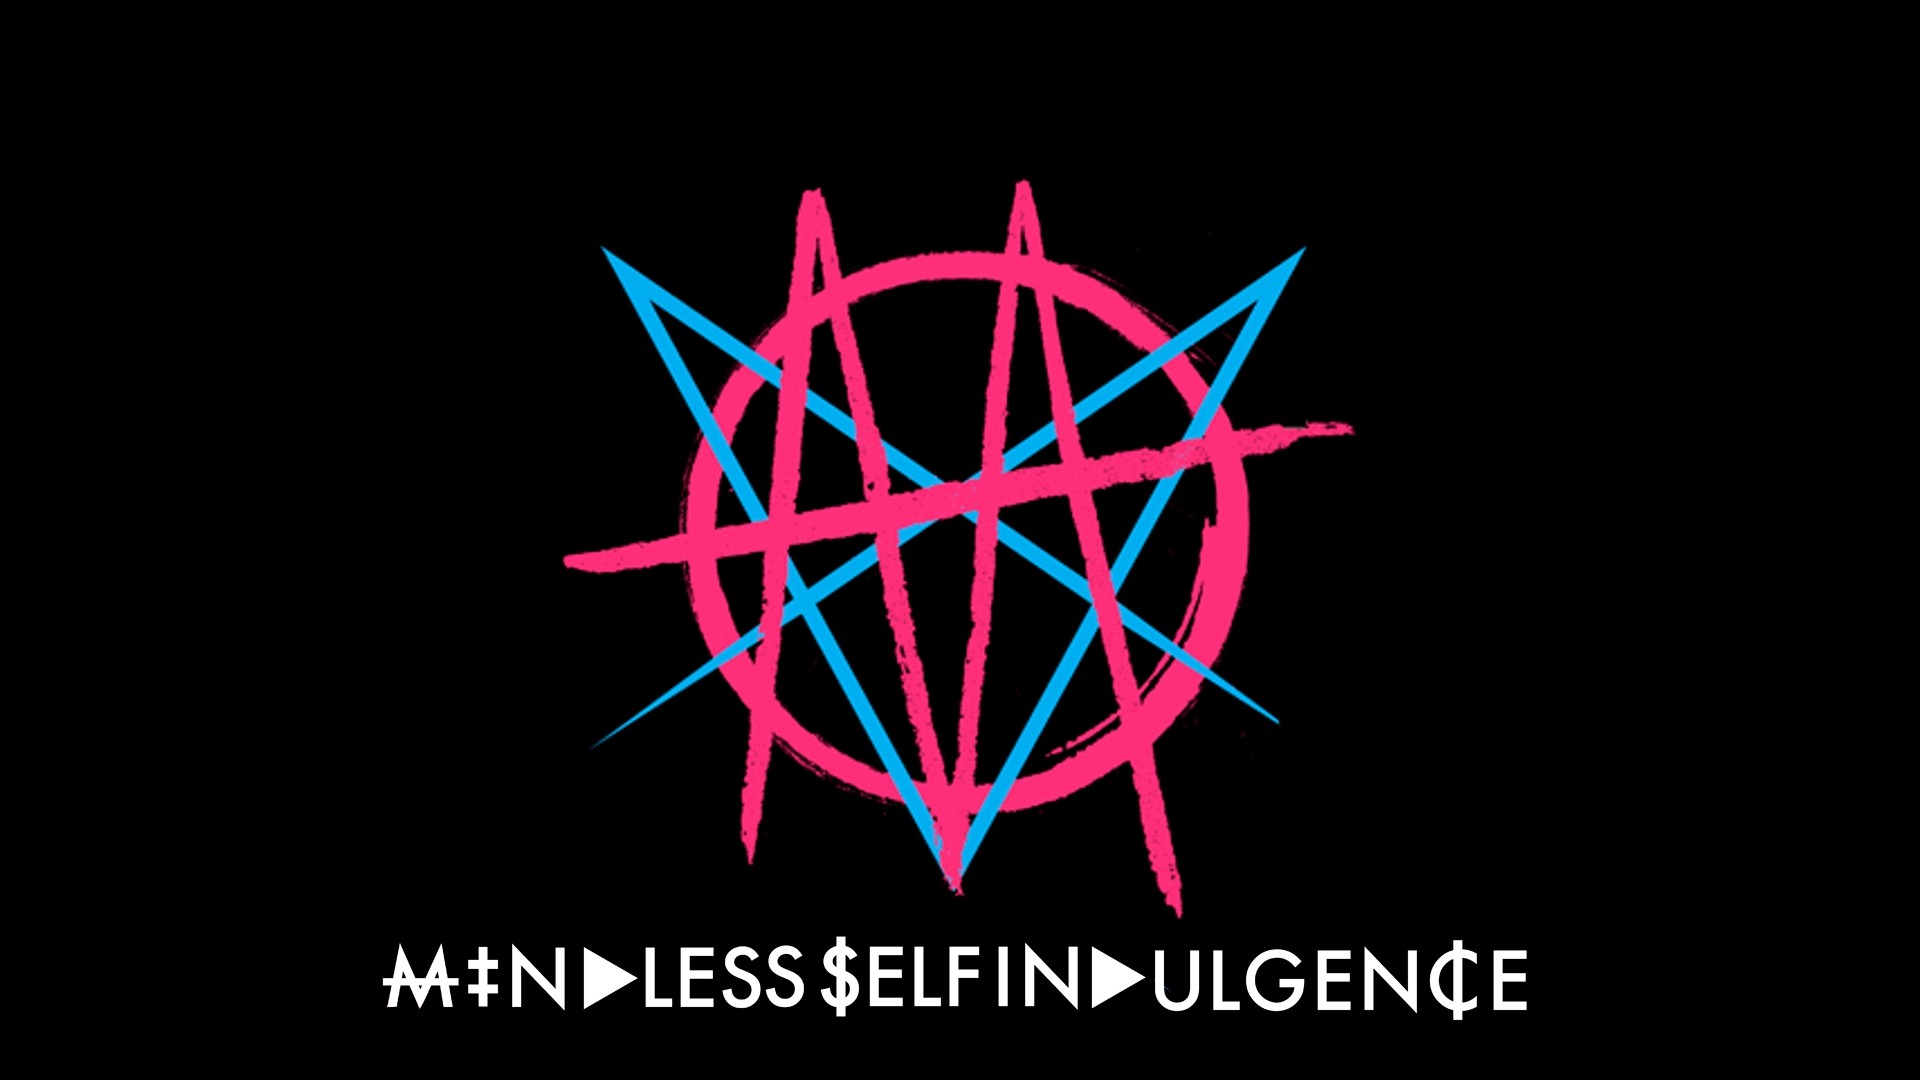 1920x1080 Mindless Self Indulgence Wallpapers - Wallpaper Cave Mindless Self  Indulgence desktop backround () : wallpapers ...